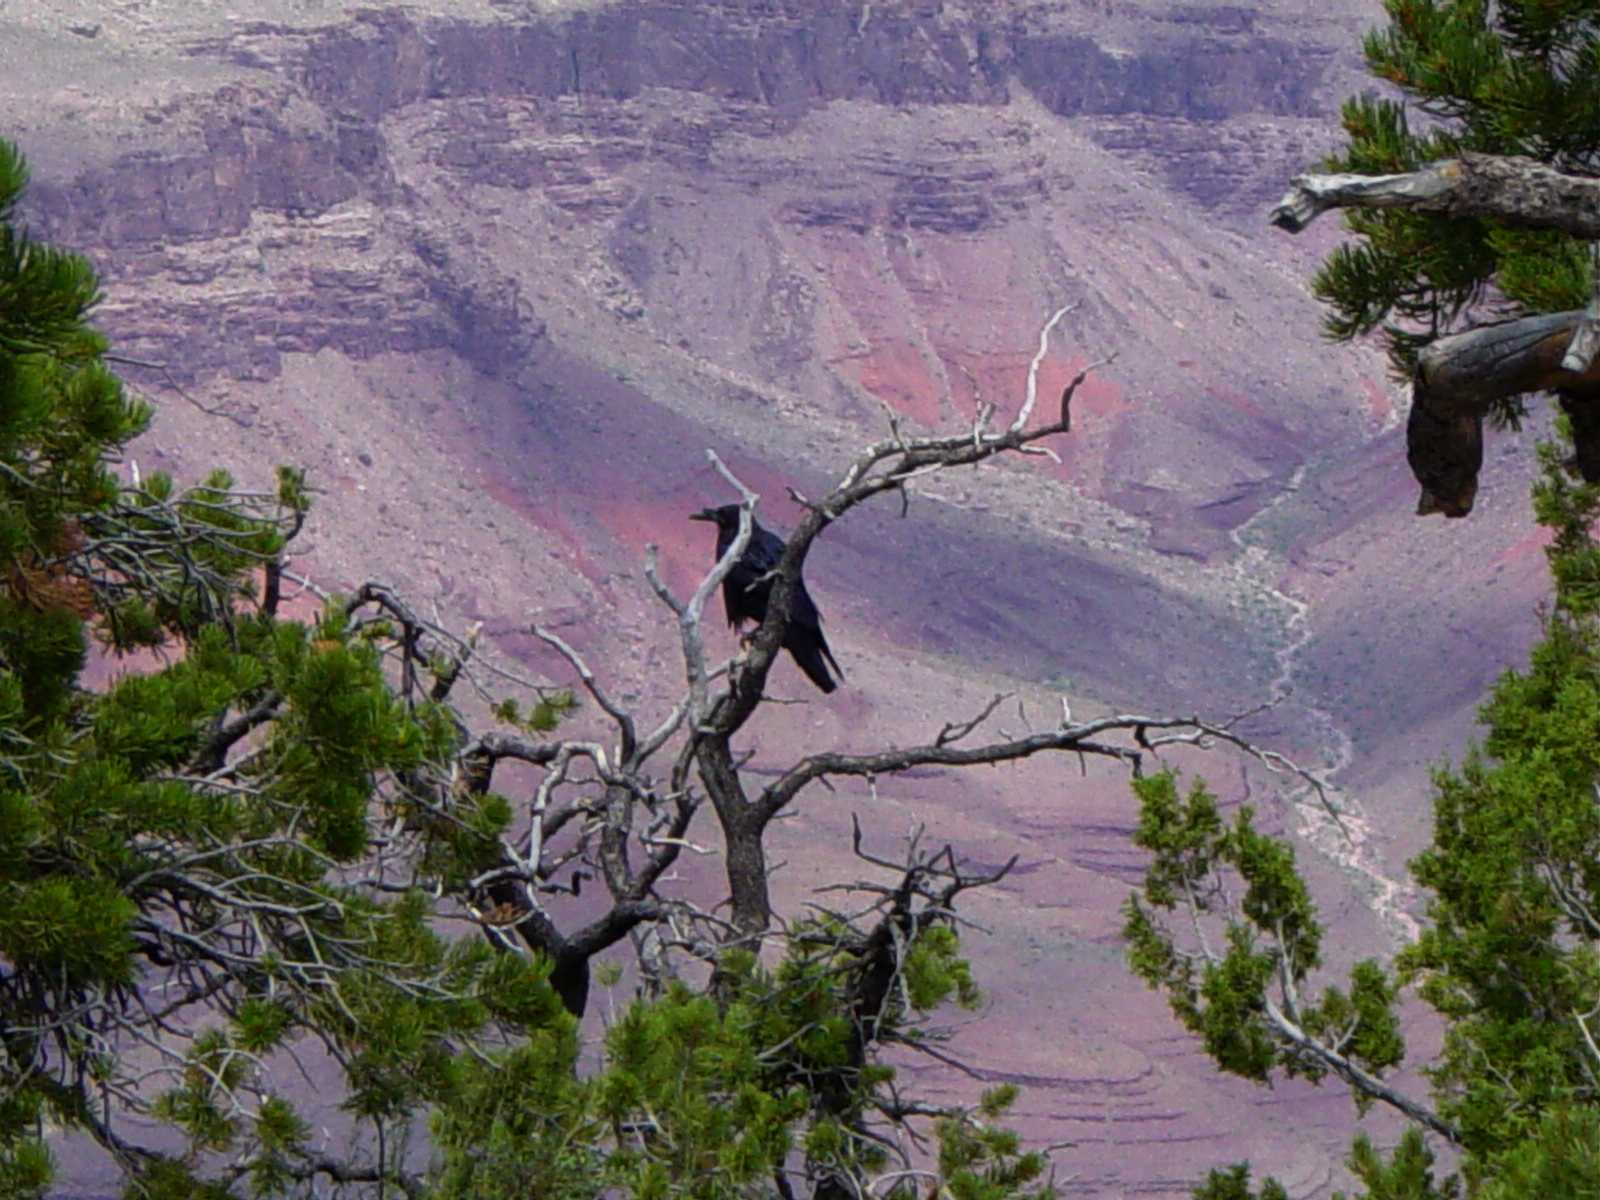 Large bird over the canyon